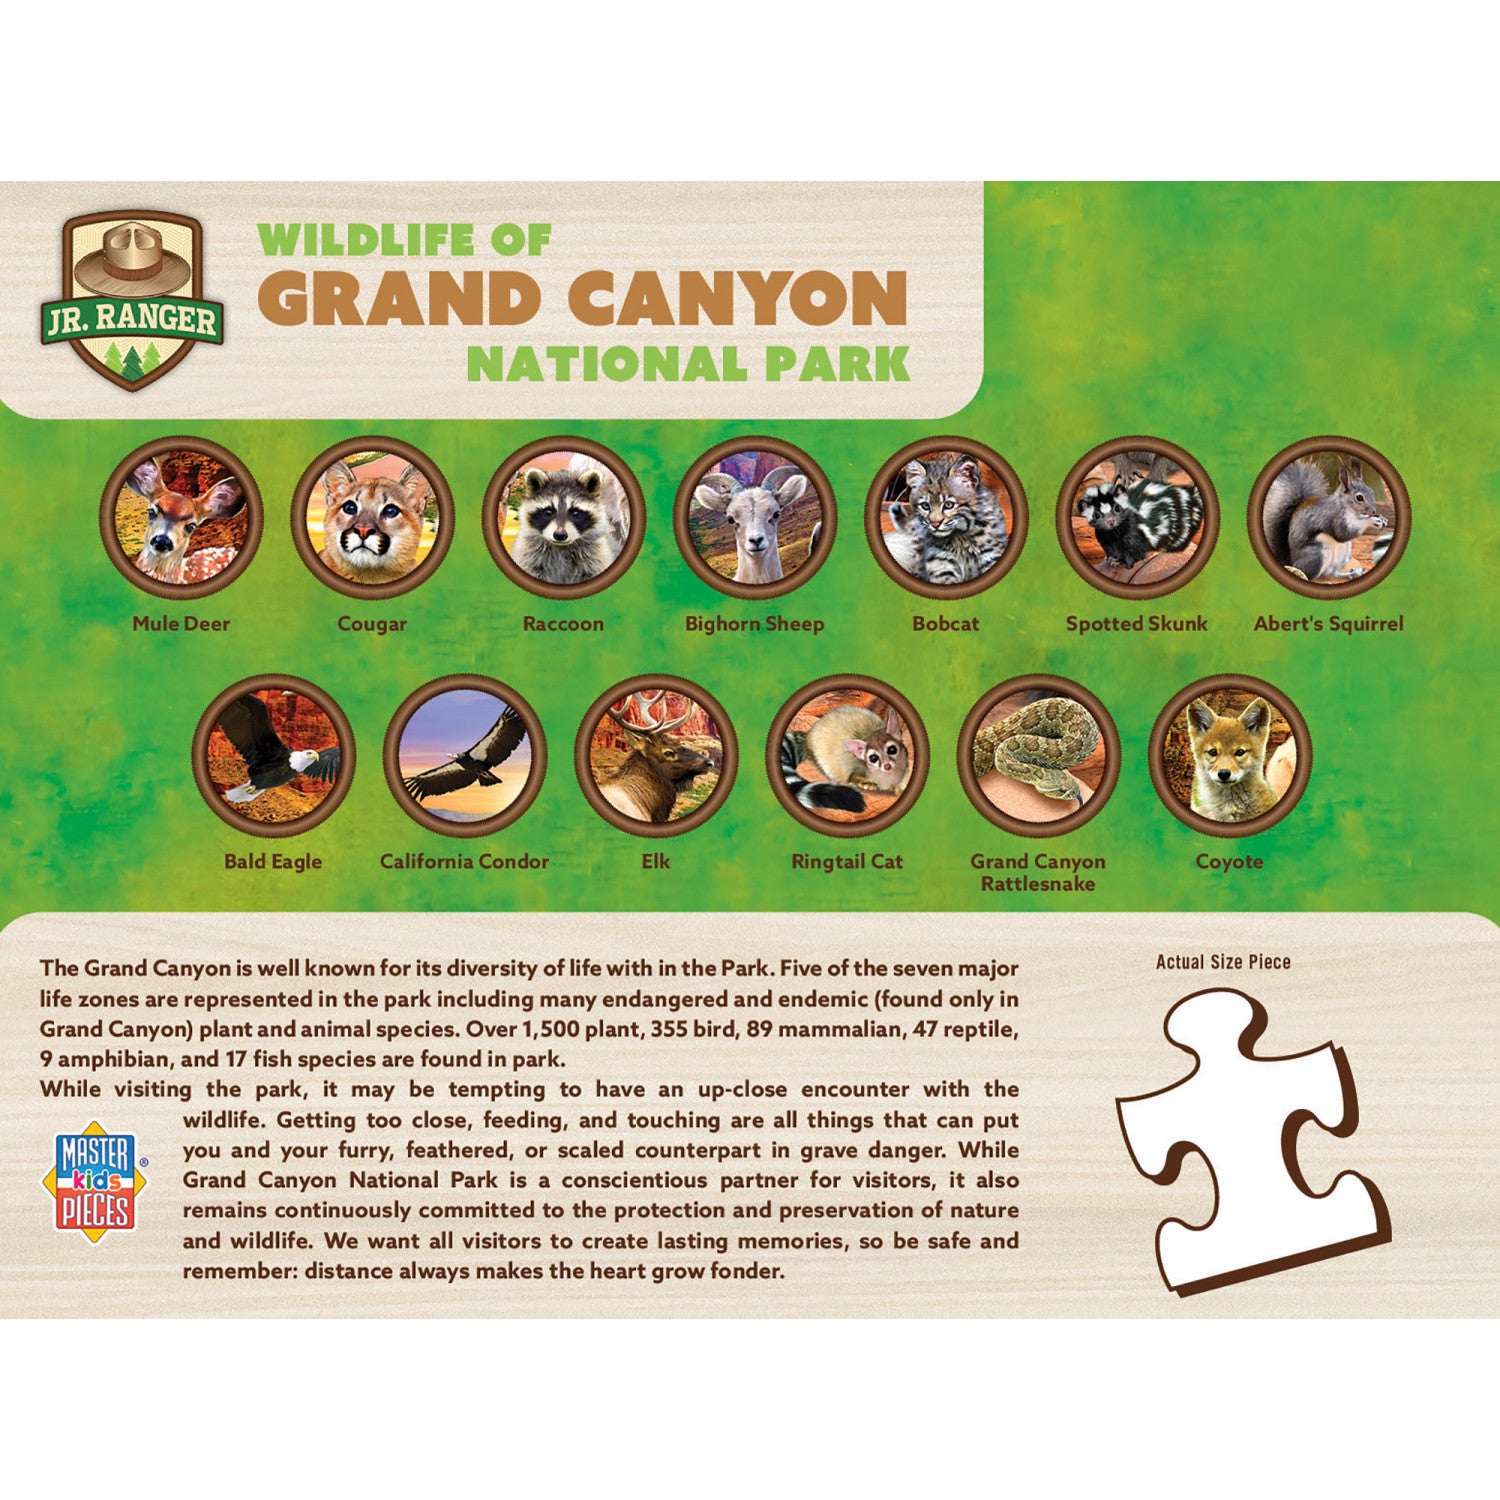 Wildlife of Grand Canyon National Park - 100 Piece Jigsaw Puzzle